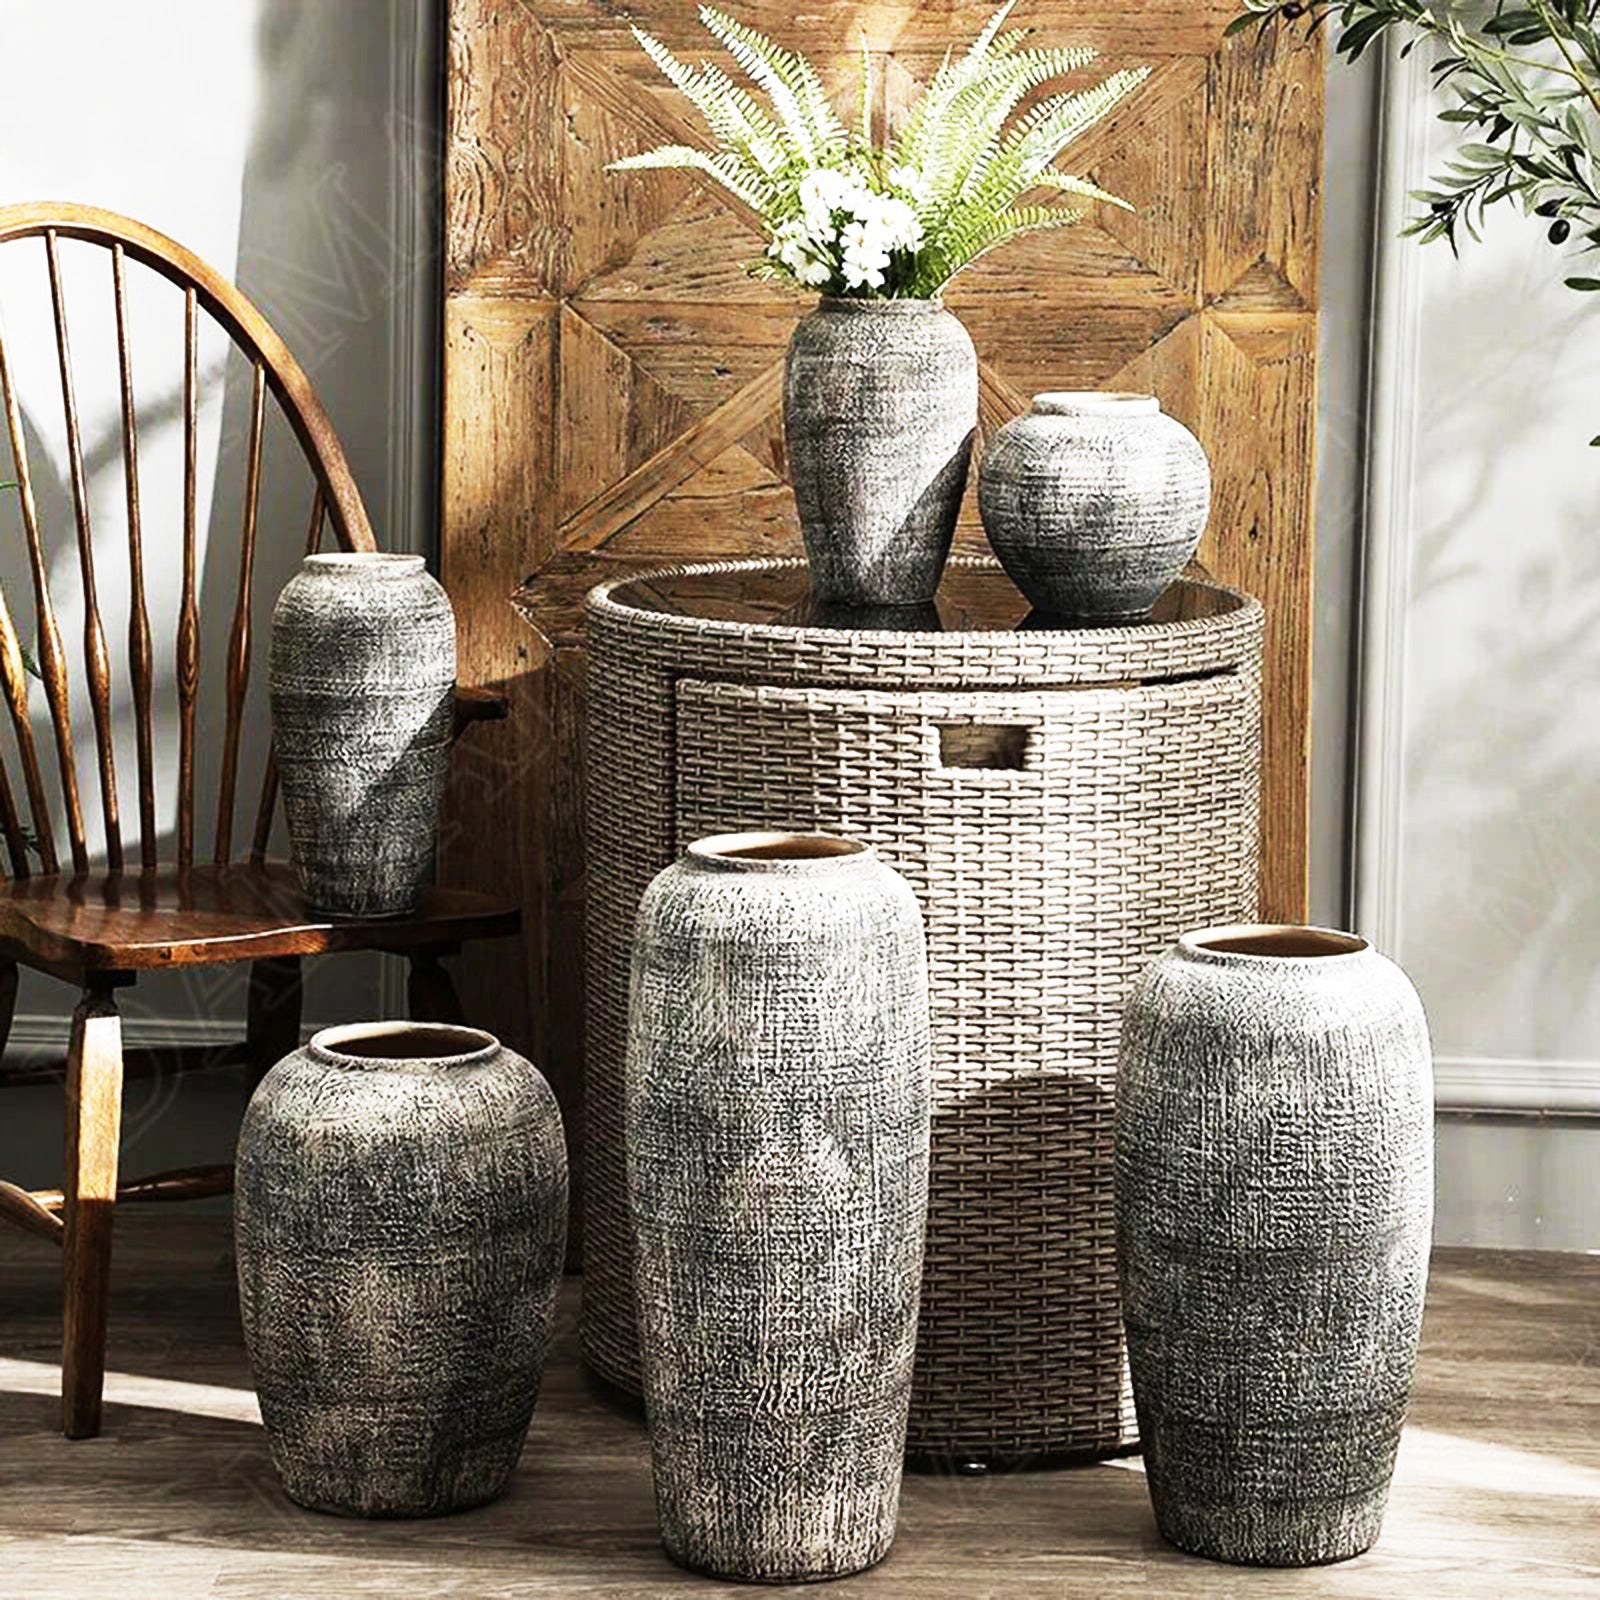 Nordic Charm: Vases with Linework Pattern